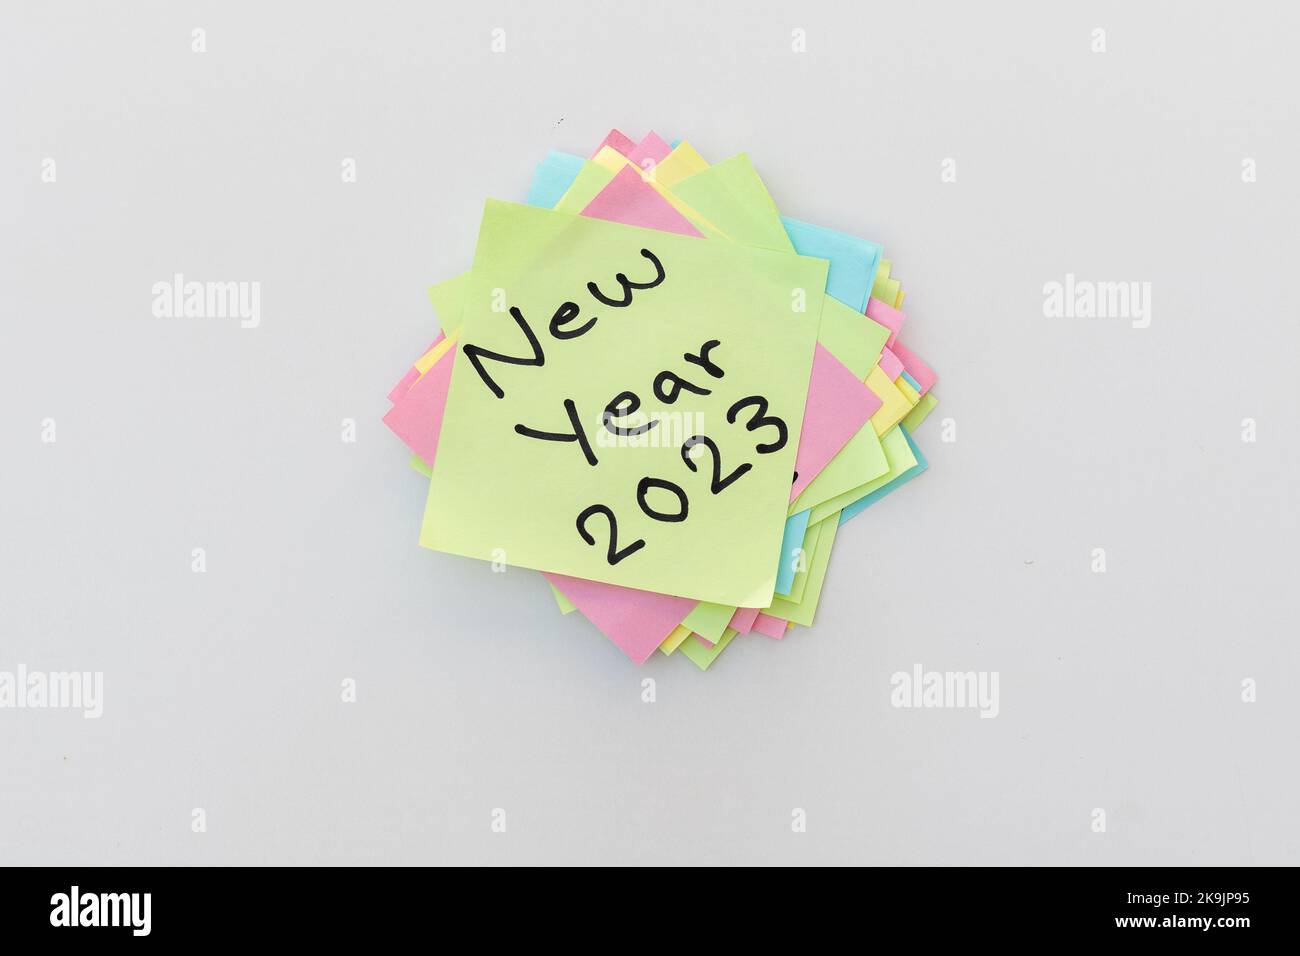 New year 2023 hand written message on a yellow sticky note Stock Photo